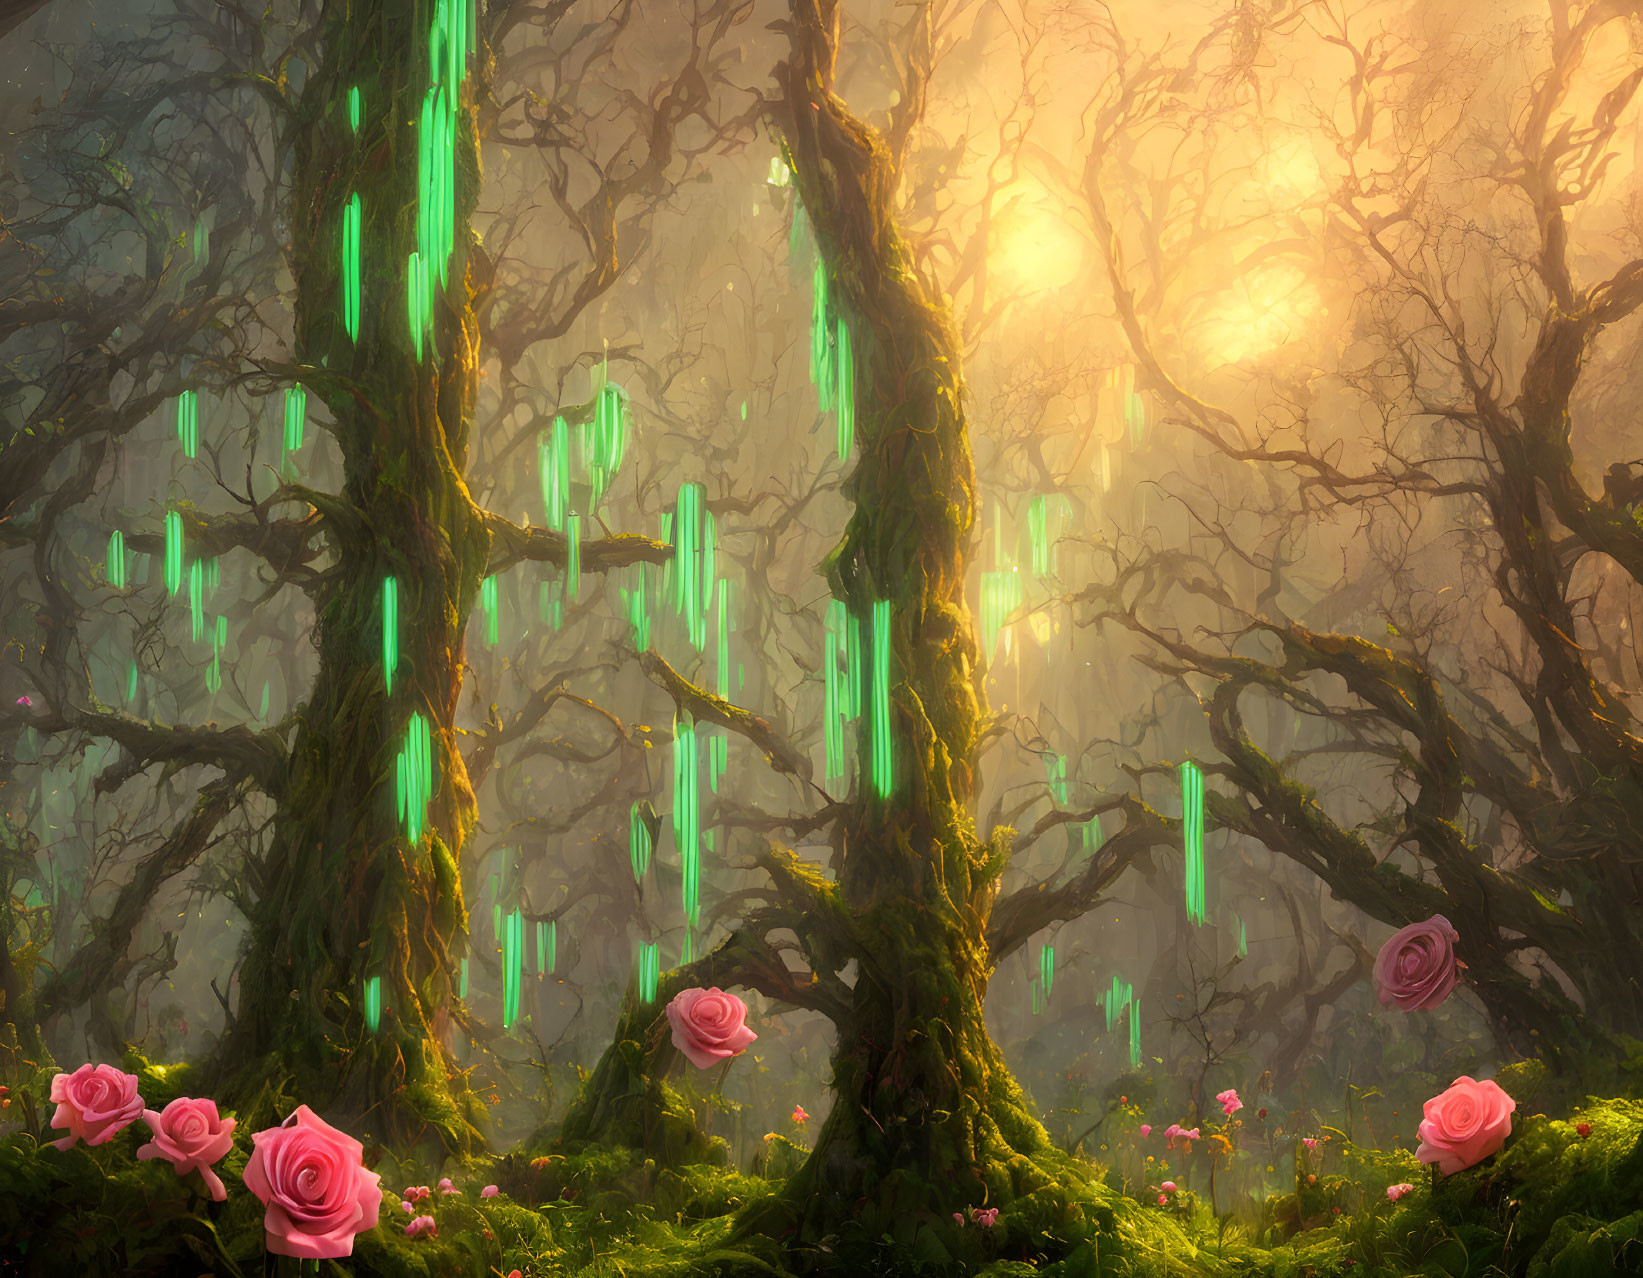 Mystical forest with green crystals, intertwined trees, and pink roses.